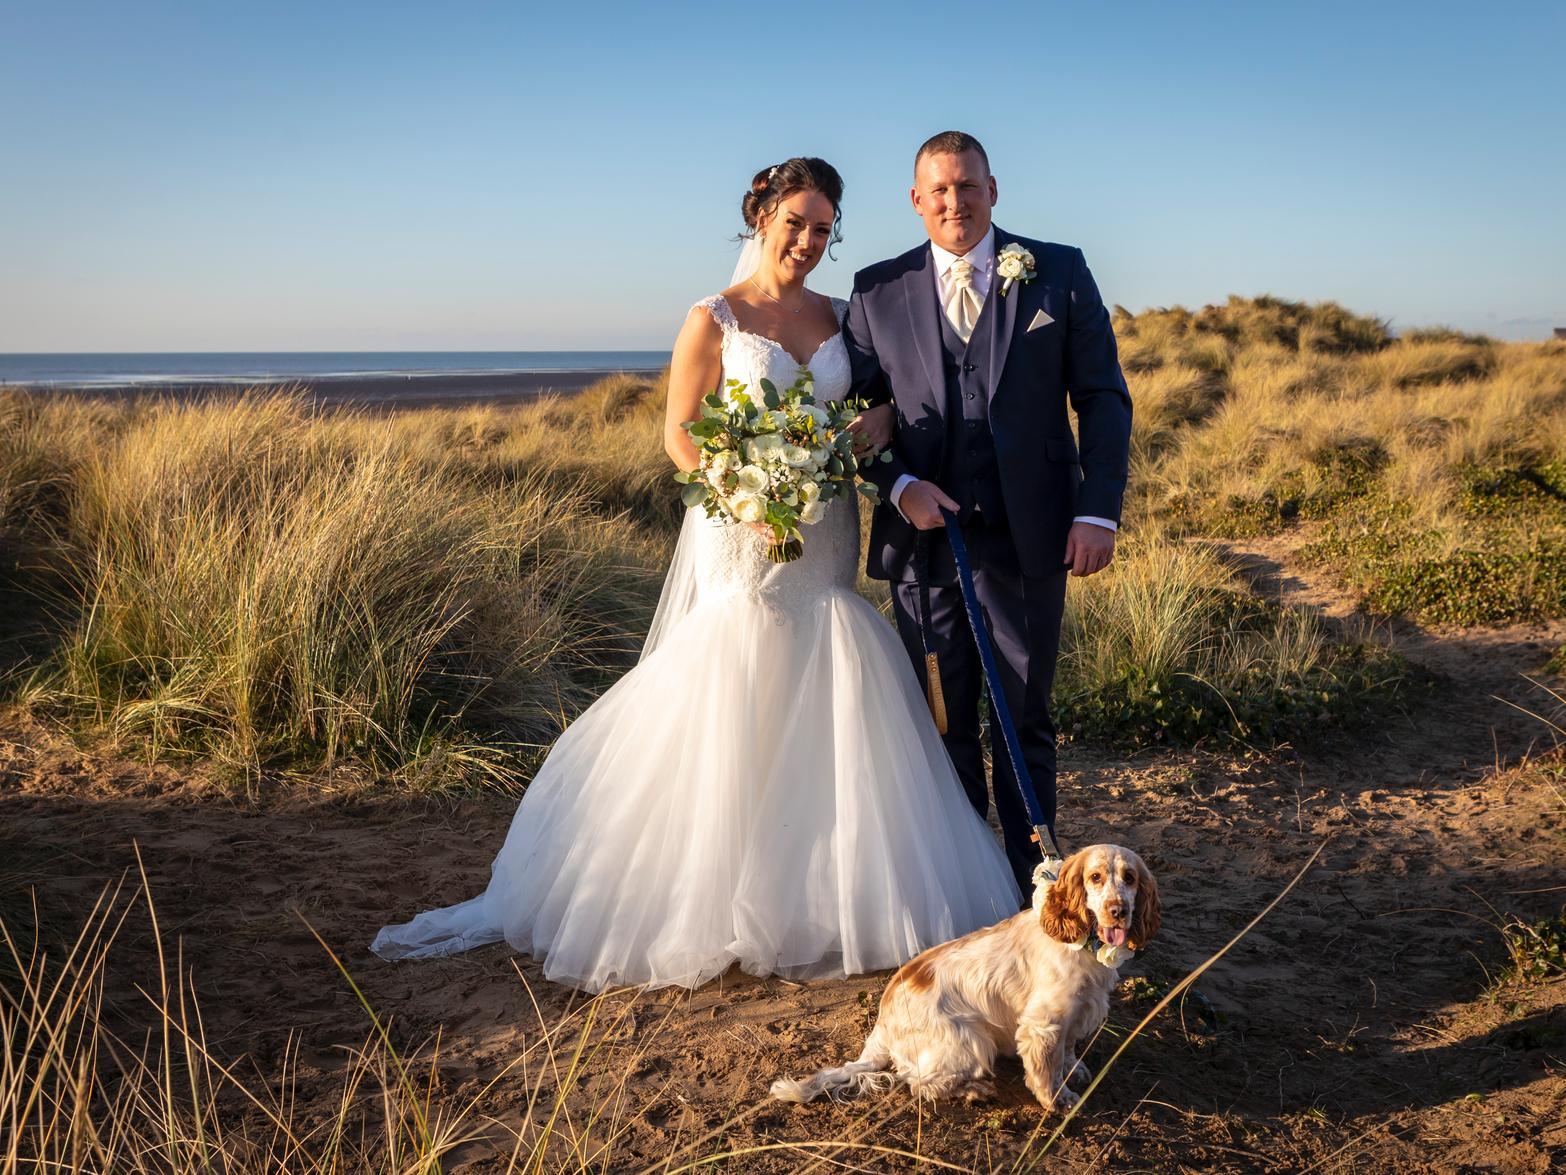 The couples cocker spaniel, Millie, joined them at the dog-friendly venue where she enjoyed all the fuss from friends and family before joining the couple for photos on the sand dunes. Photos Nick Dagger Photography